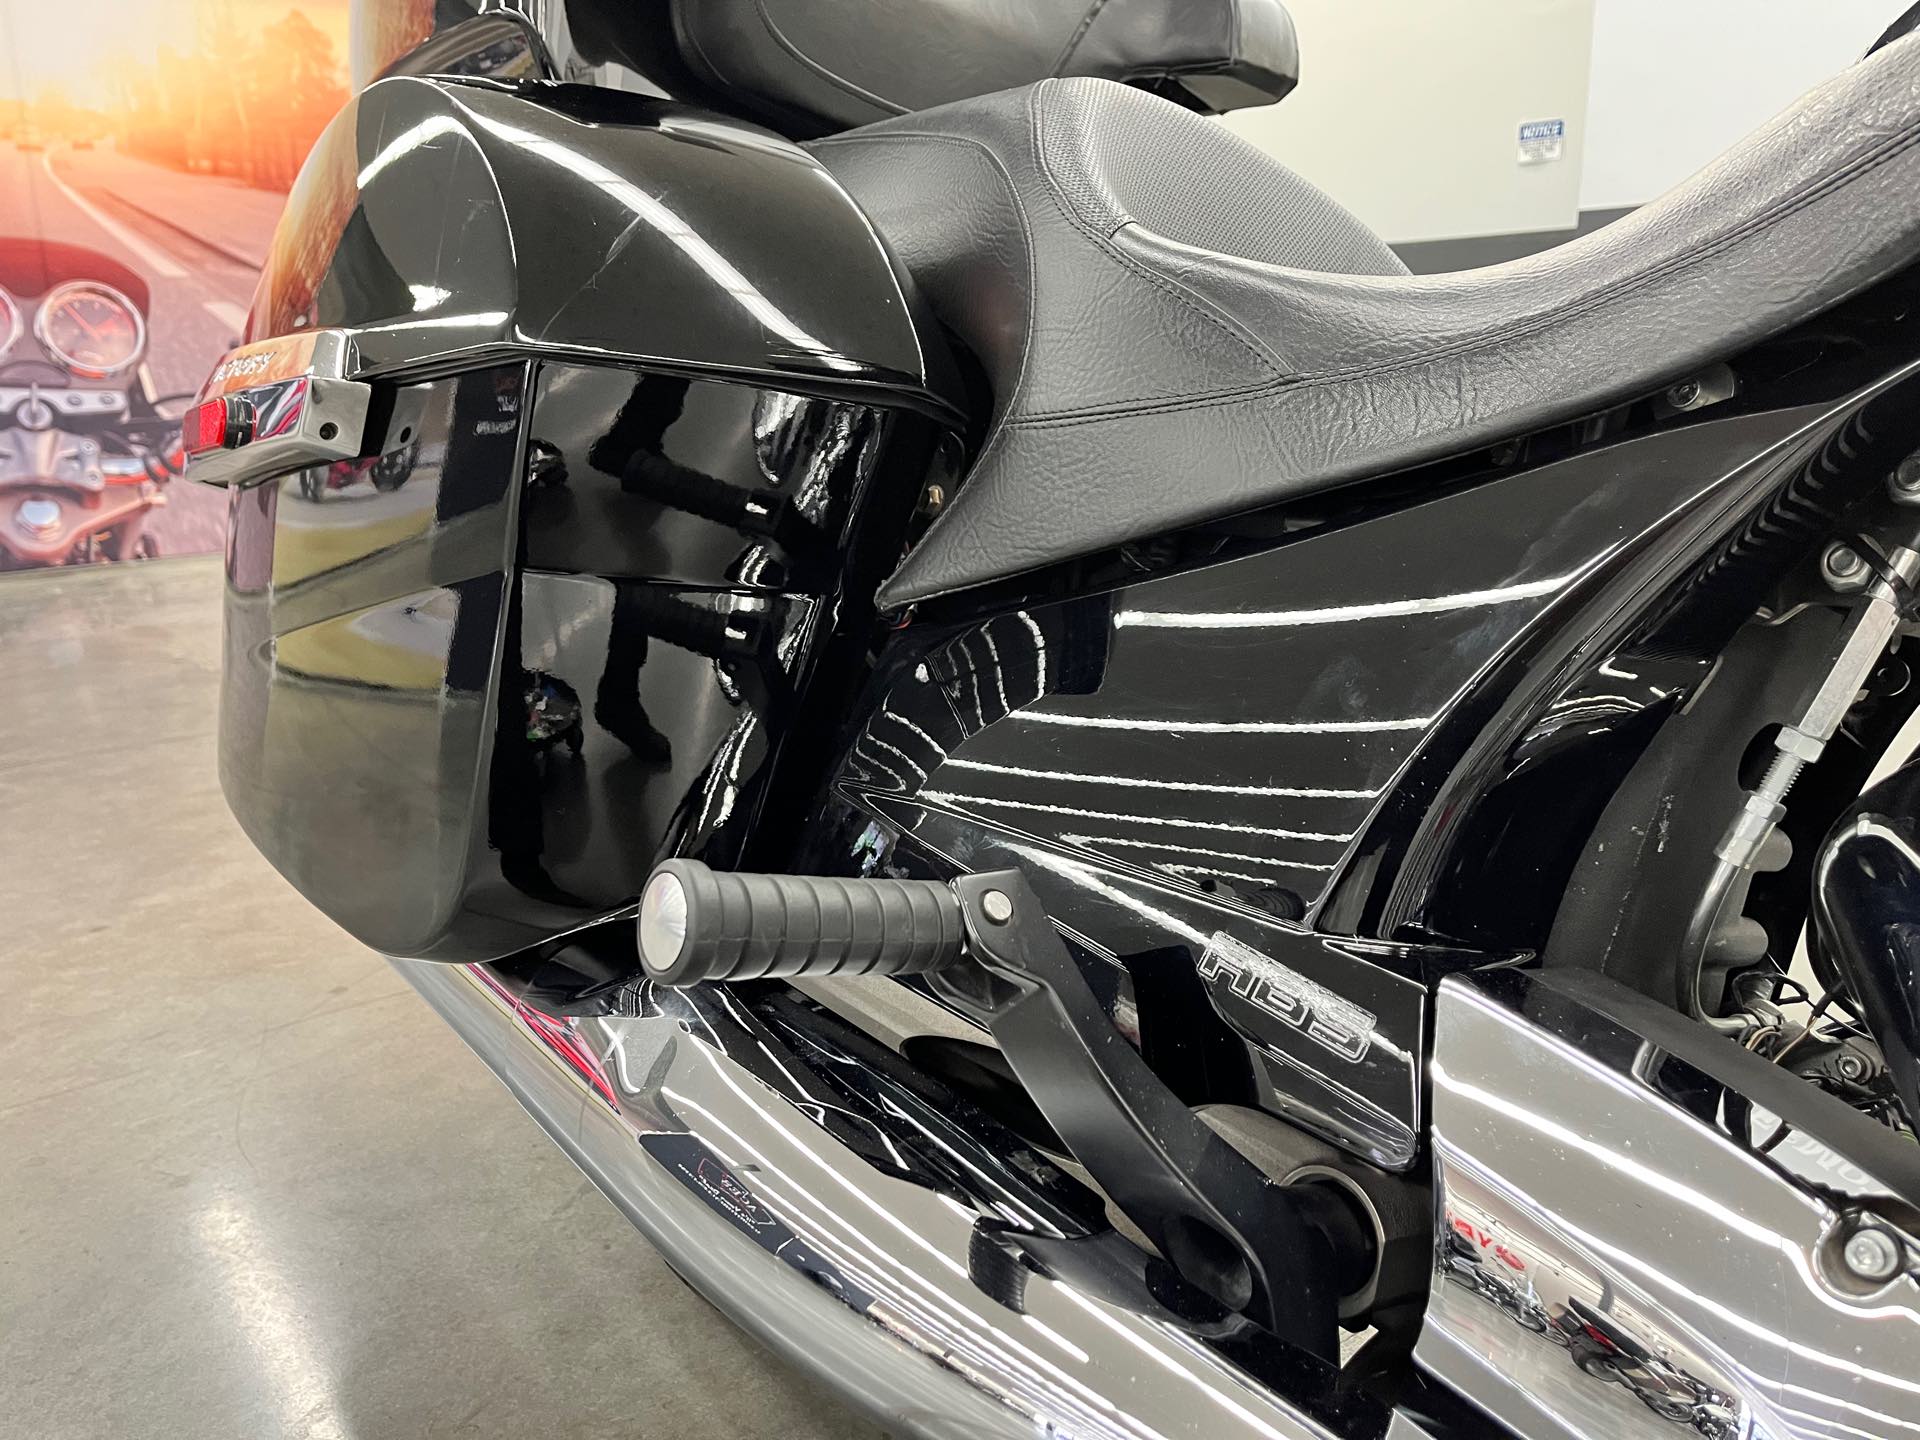 2014 Victory Cross Country Base at Aces Motorcycles - Denver